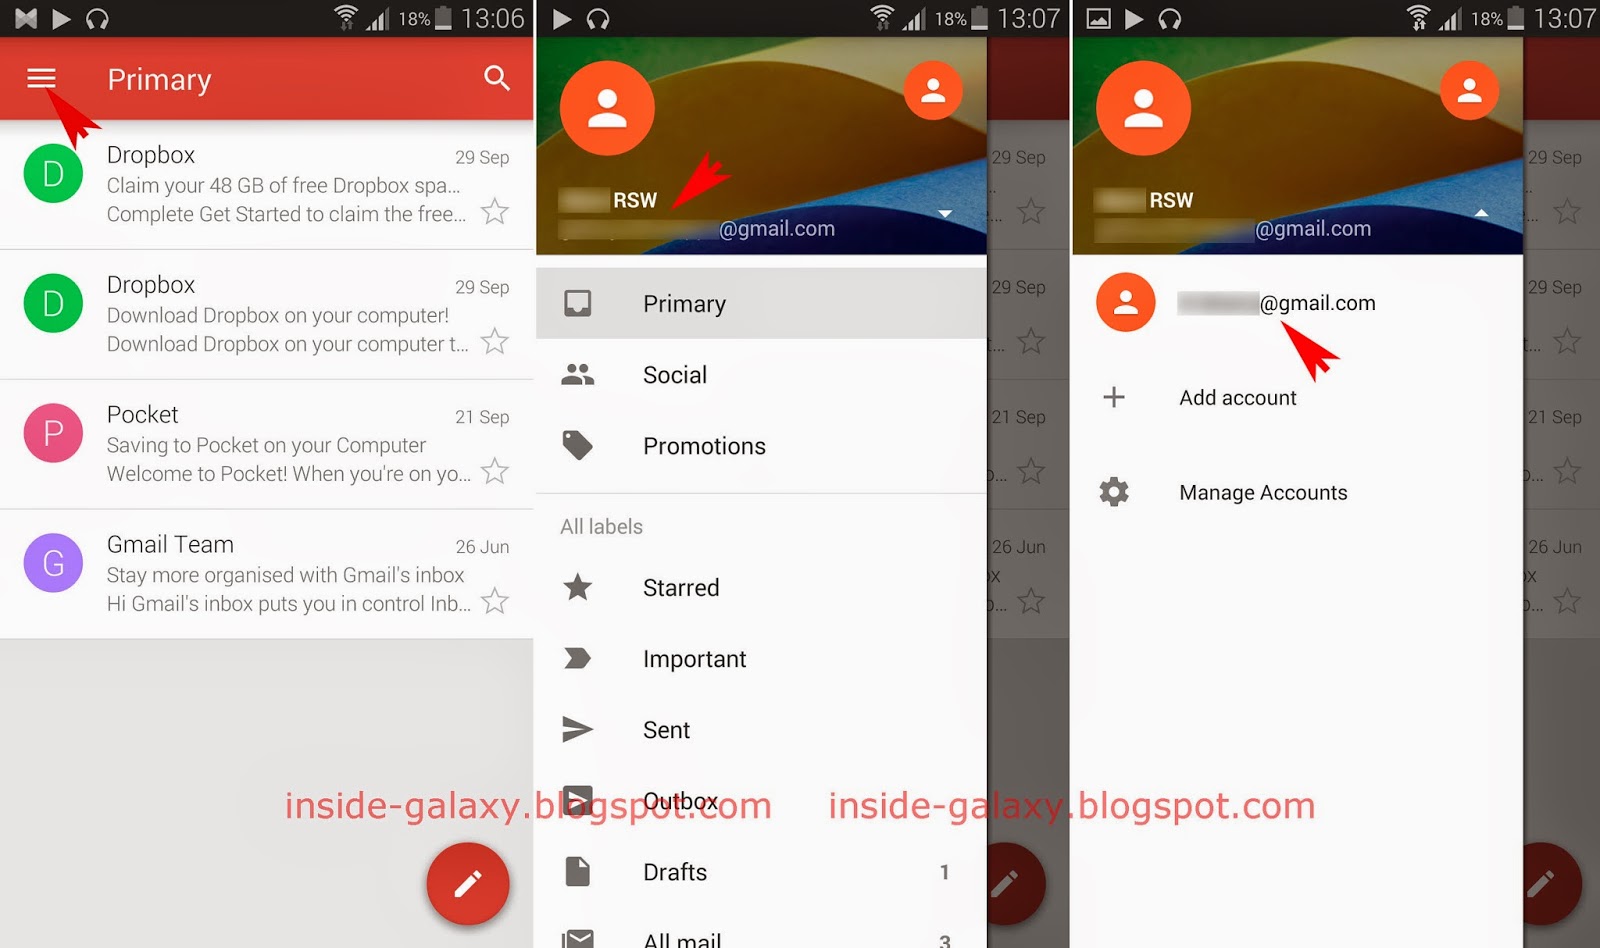 Samsung Galaxy S5: How to Switch Between Accounts in Gmail 